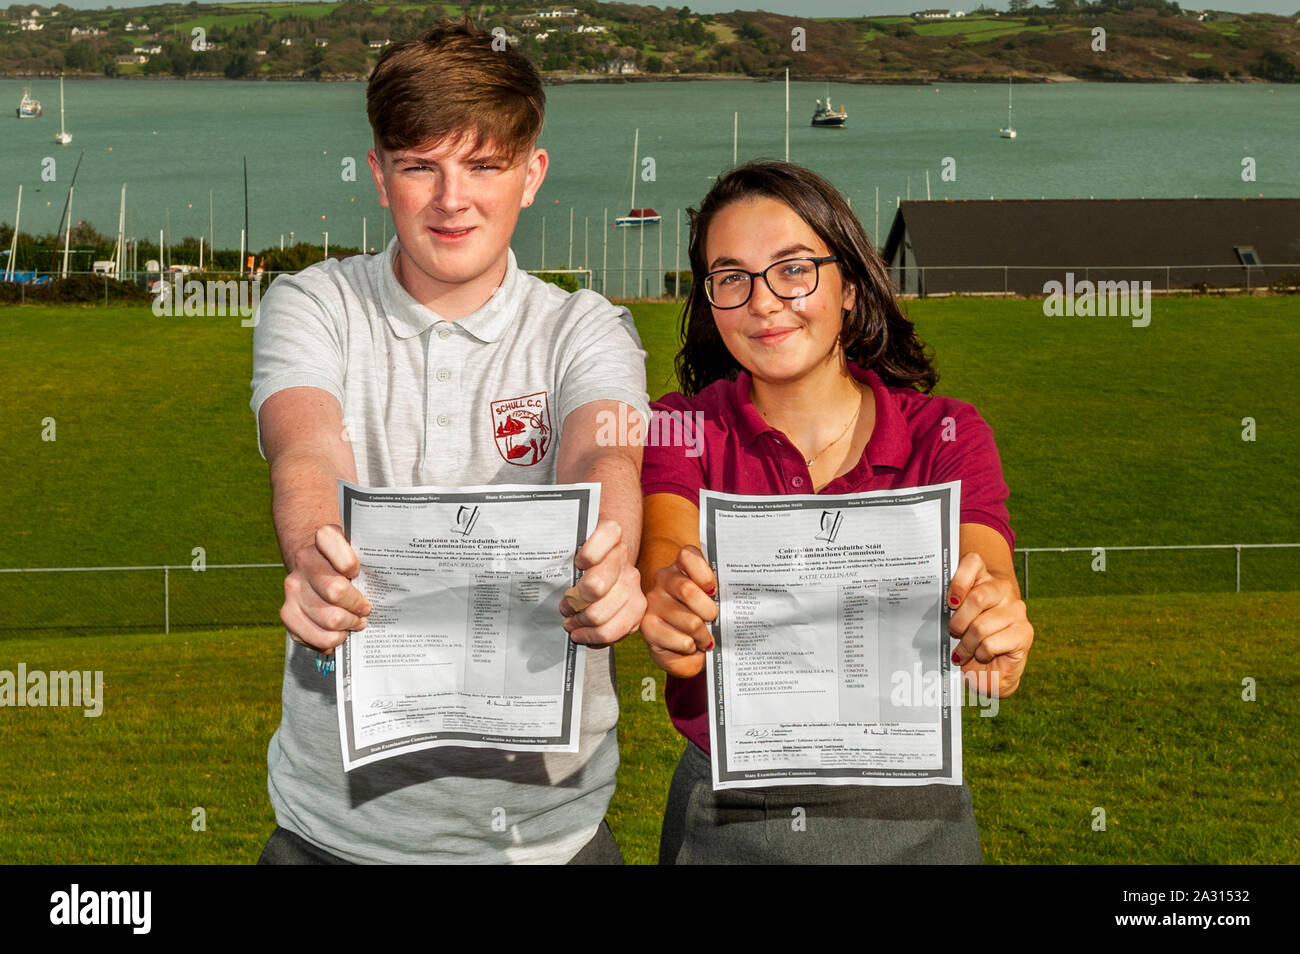 Schull, West Cork, Ireland. 4th Oct, 2019. Over 64,000 students around Ireland received their Junior Cert results this afternoon. In Schull Community College, West Cork, many students were beside themselves with happiness on seeing their results. Pictured with their results are Brian Regan, Ballydehob and Katie Cullinane, Goleen. Credit: Andy Gibson/Alamy Live News. Stock Photo